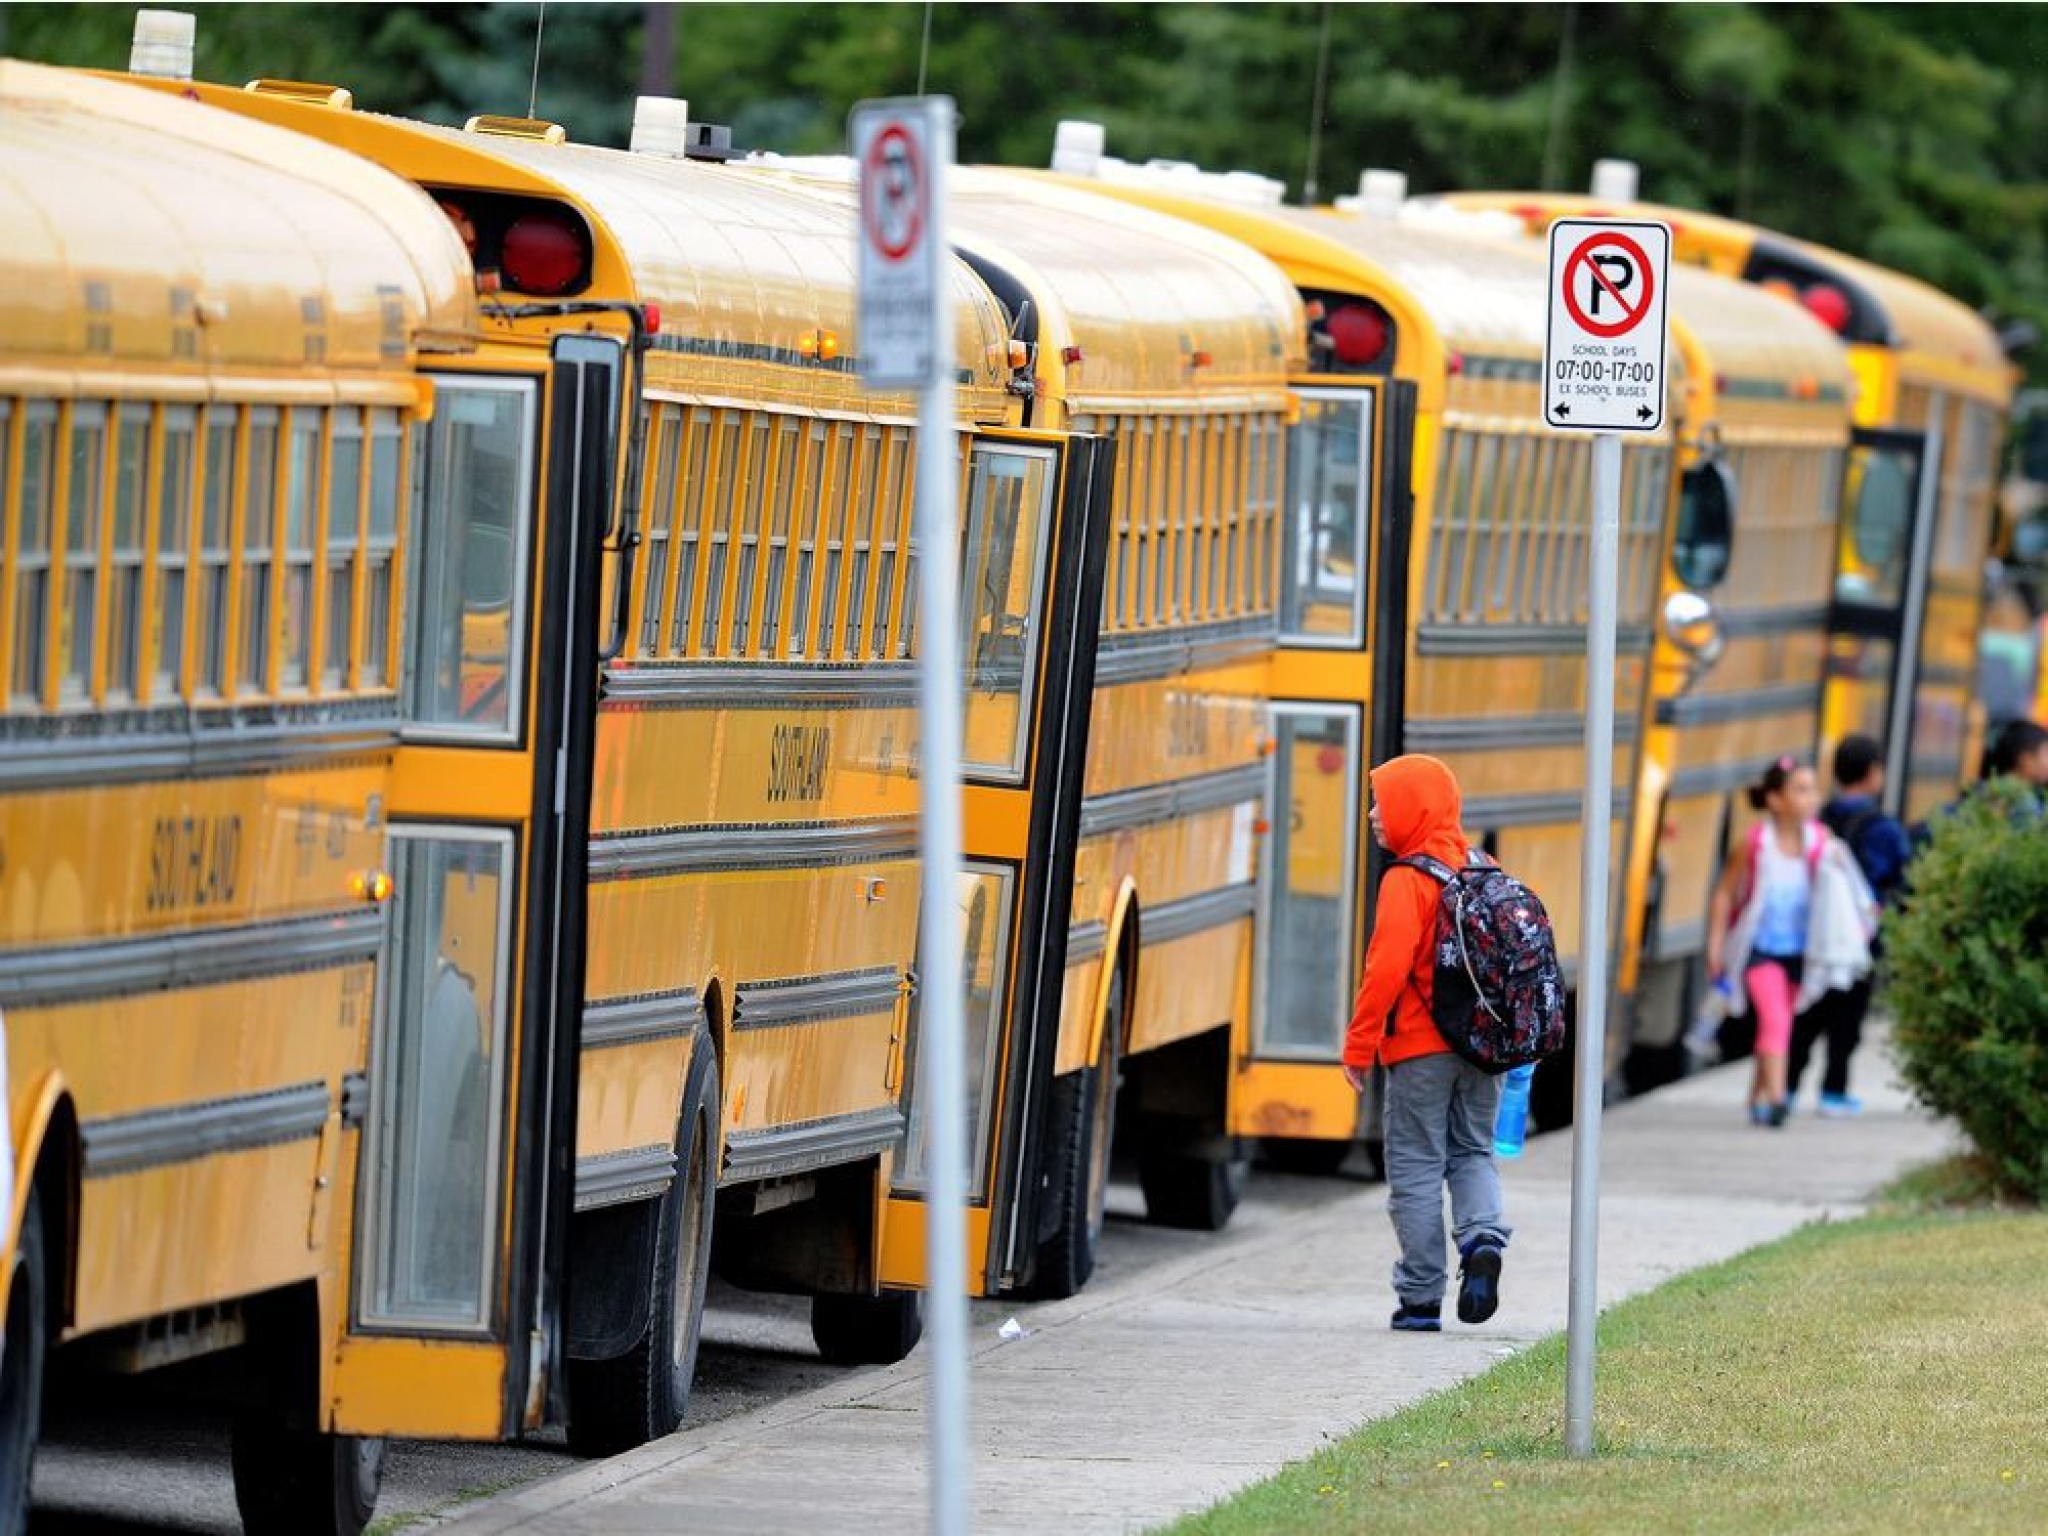 Quebec to spend $250 million on electric school buses